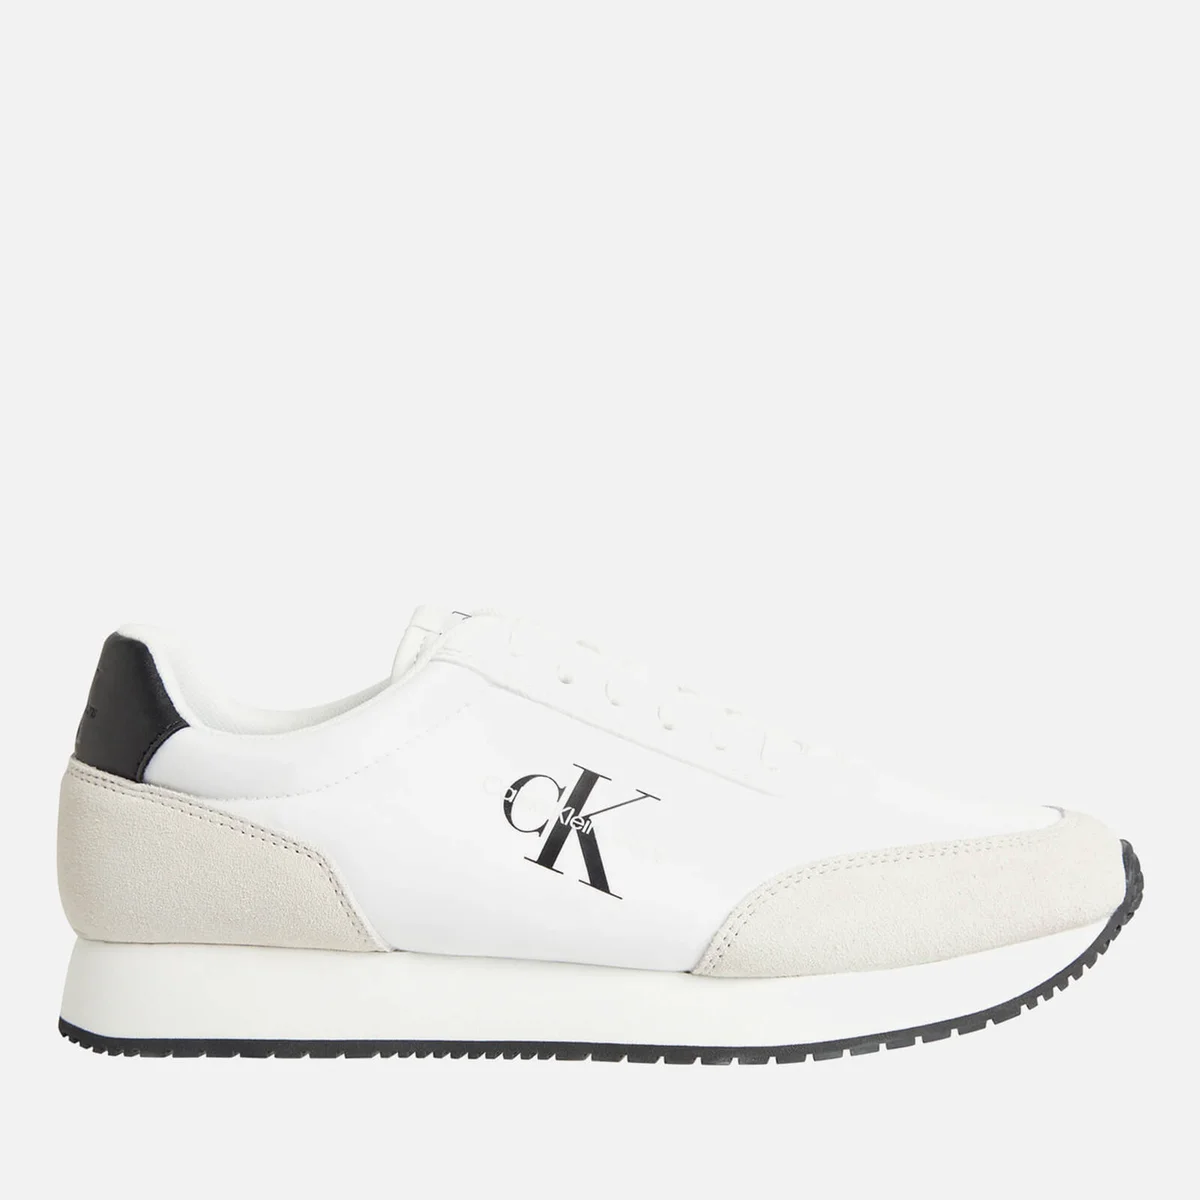 Calvin Klein Jeans Men's Retro Suede and Neoprene Trainers Image 1